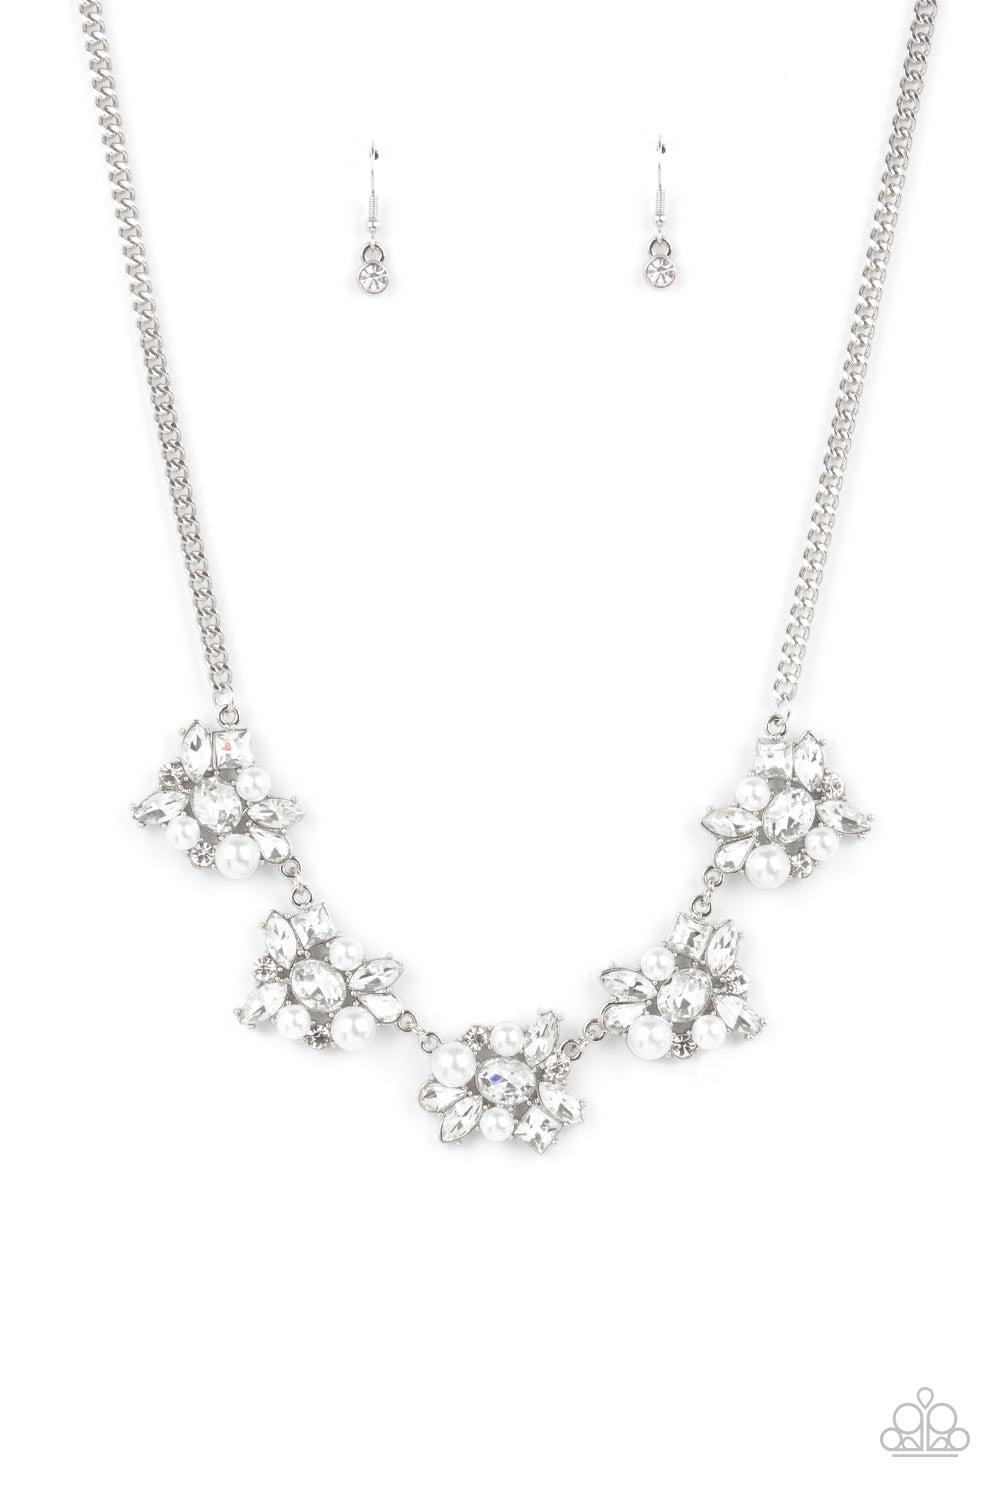 Paparazzi HEIRESS of Them All - White Necklace - A Finishing Touch Jewelry